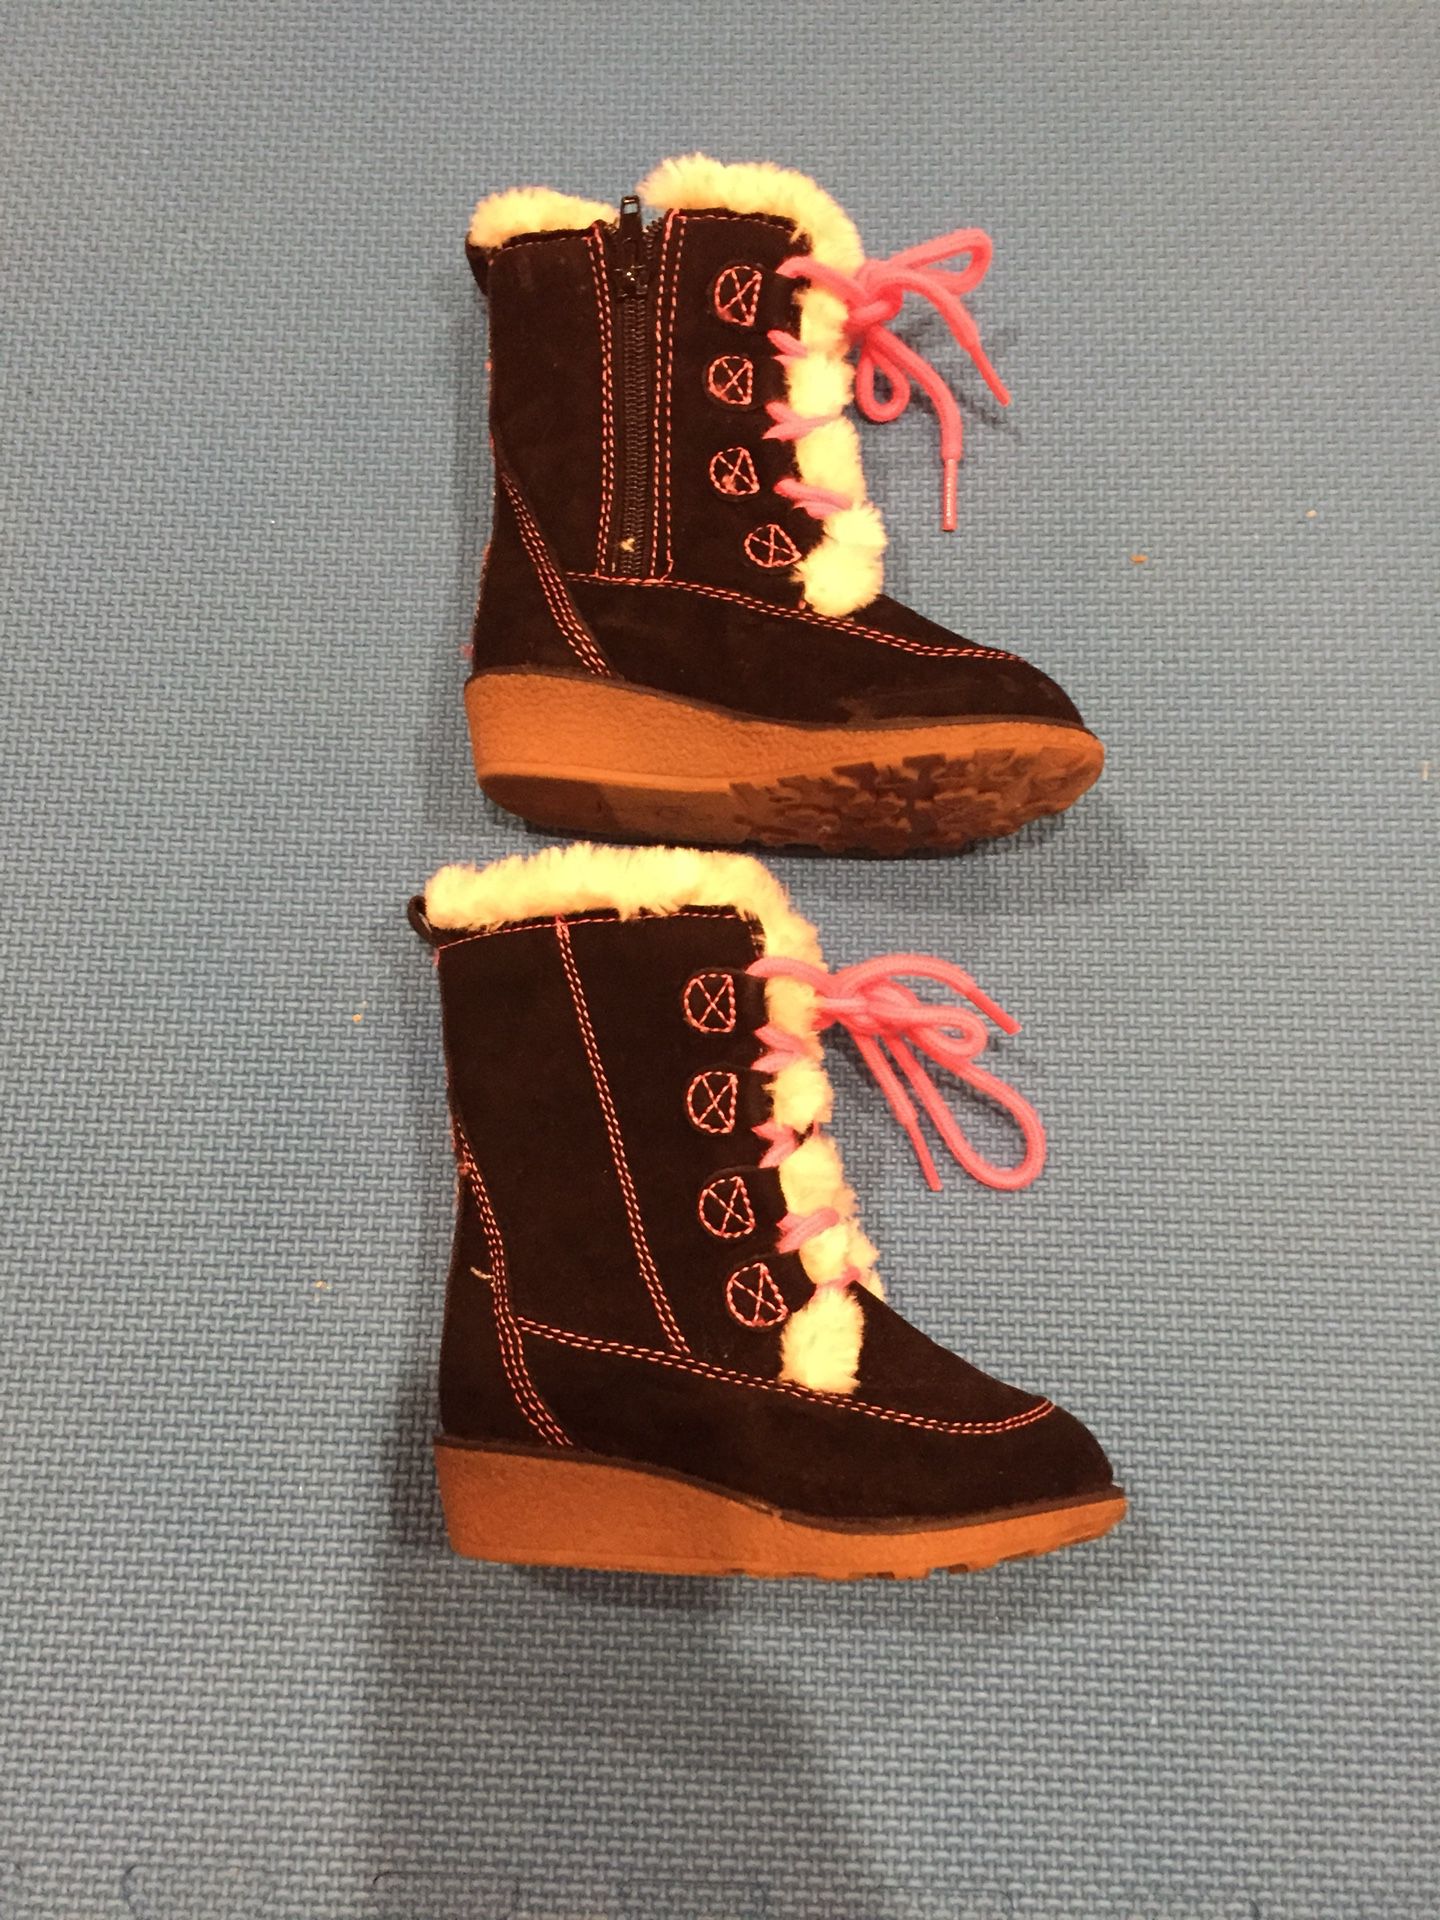 Girl Toddler size 6M boots